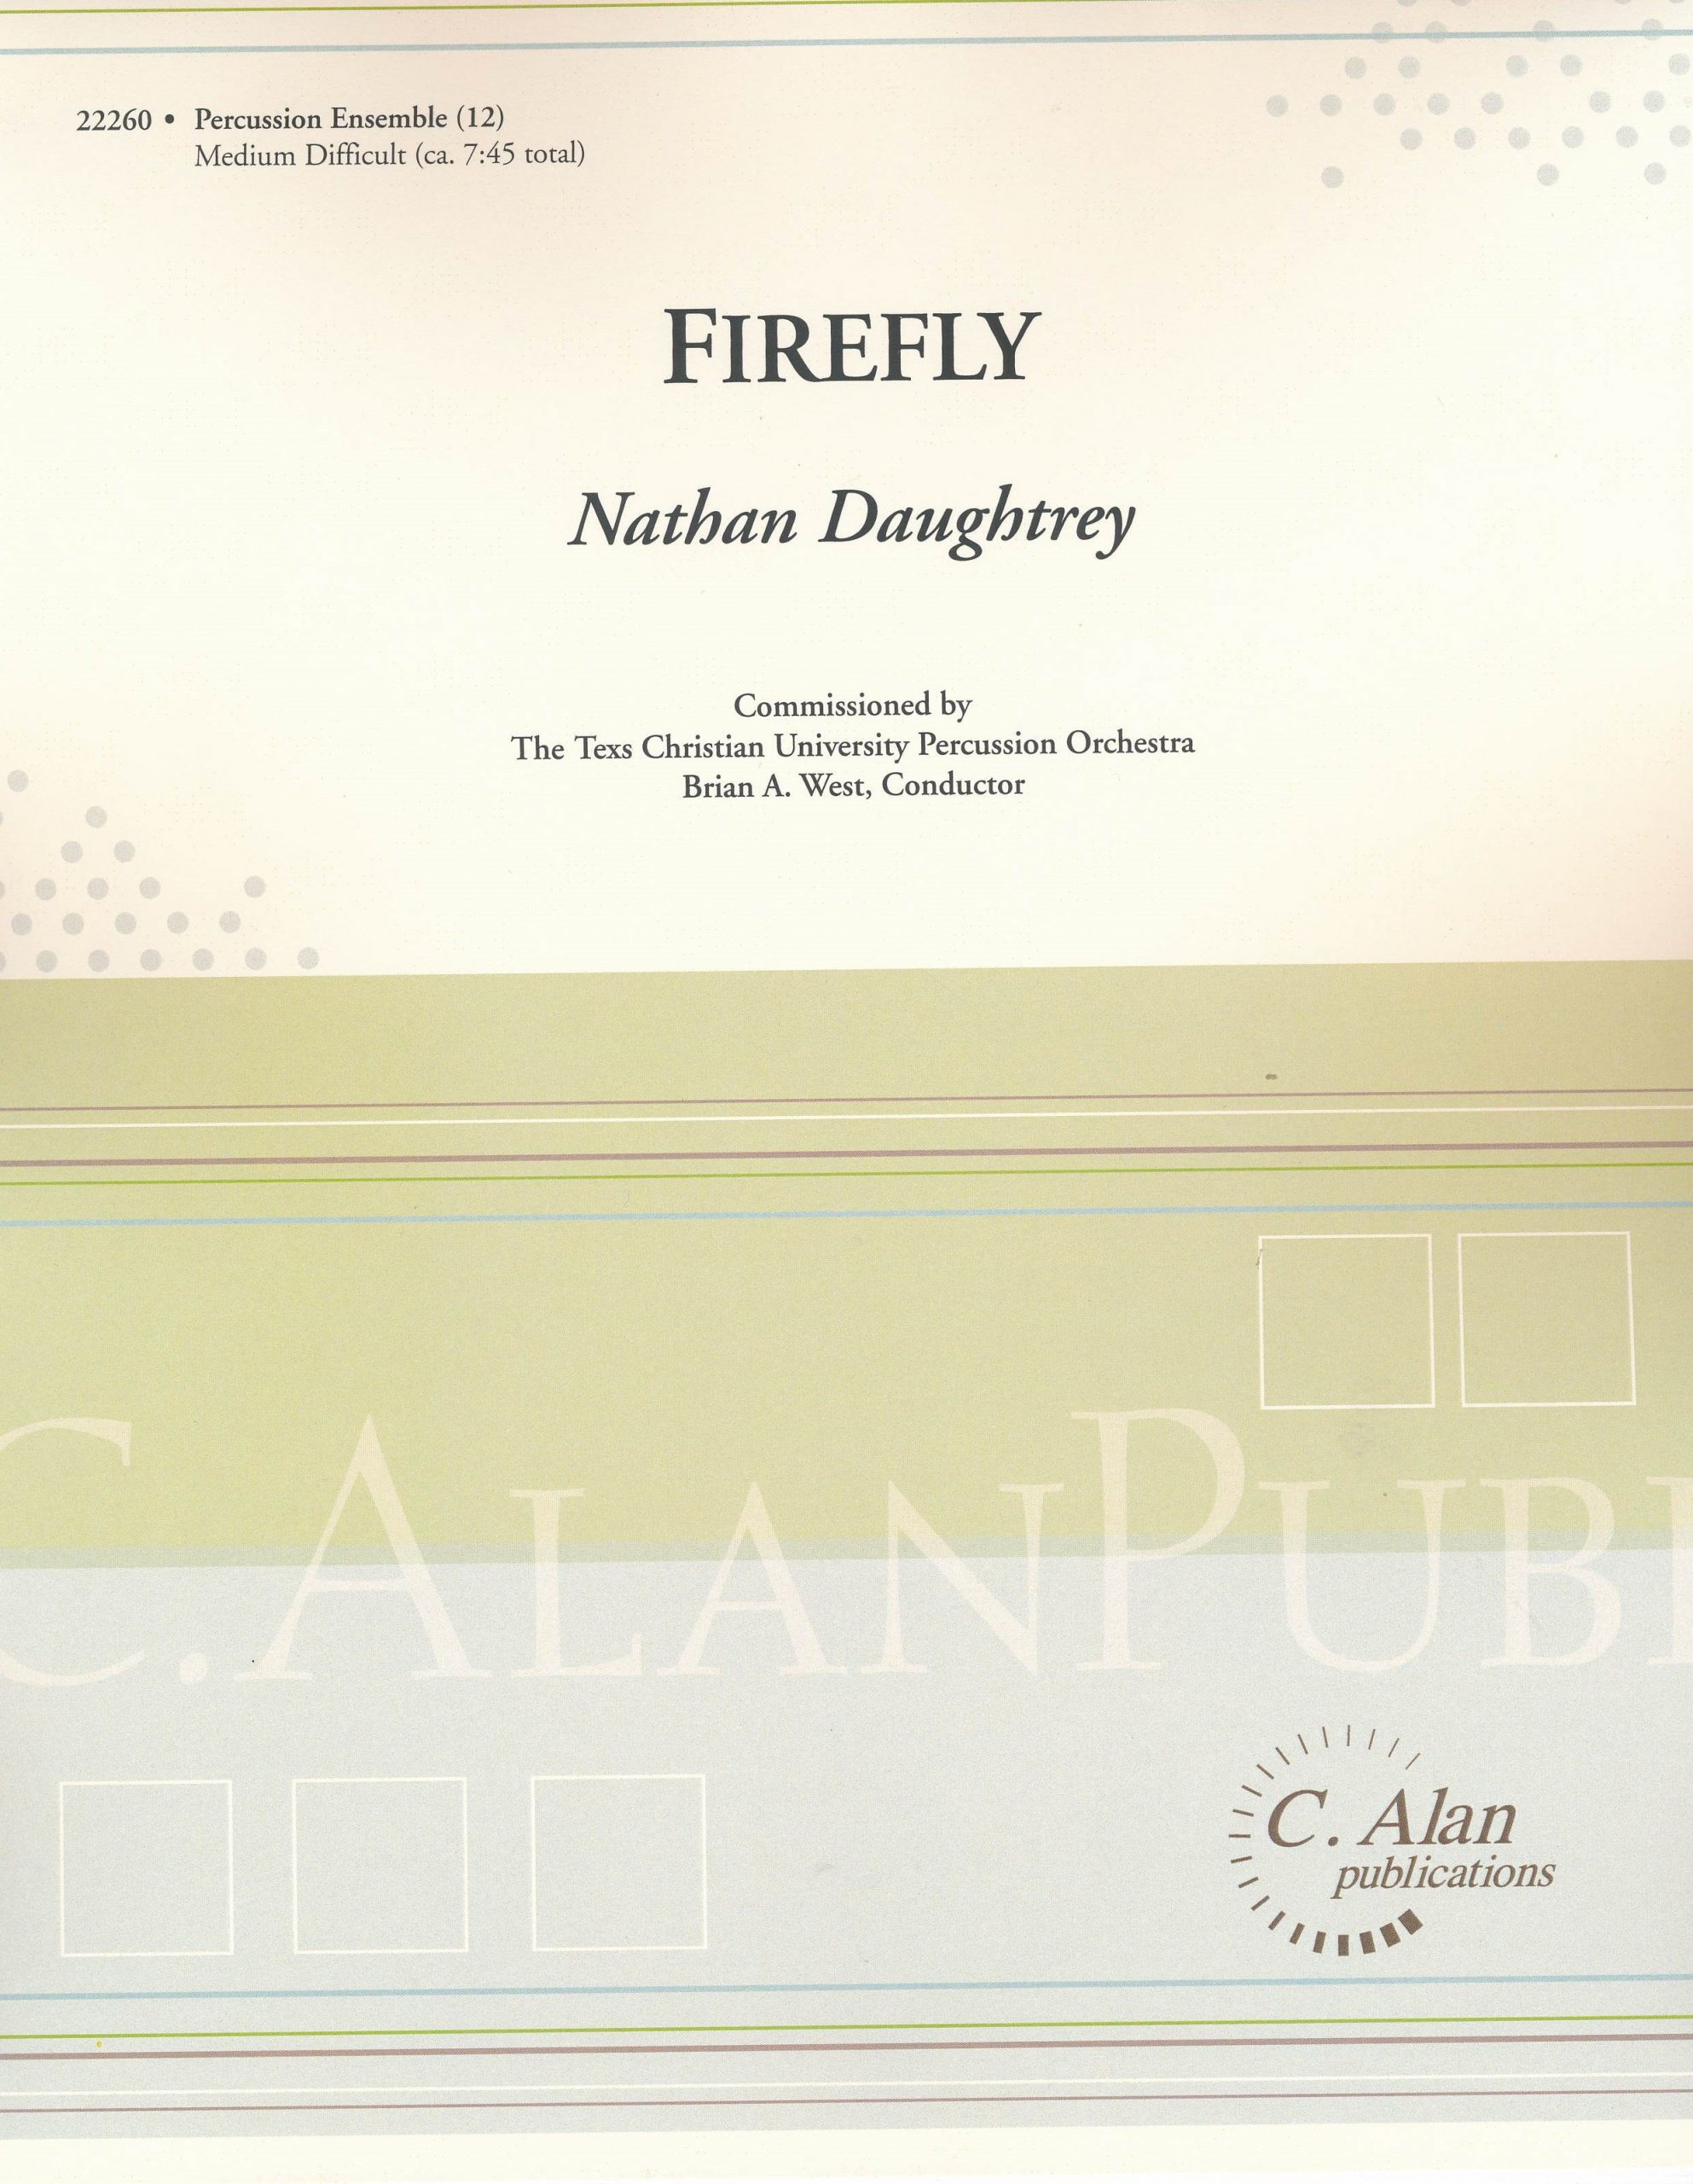 Firefly by Nathan Daughtrey